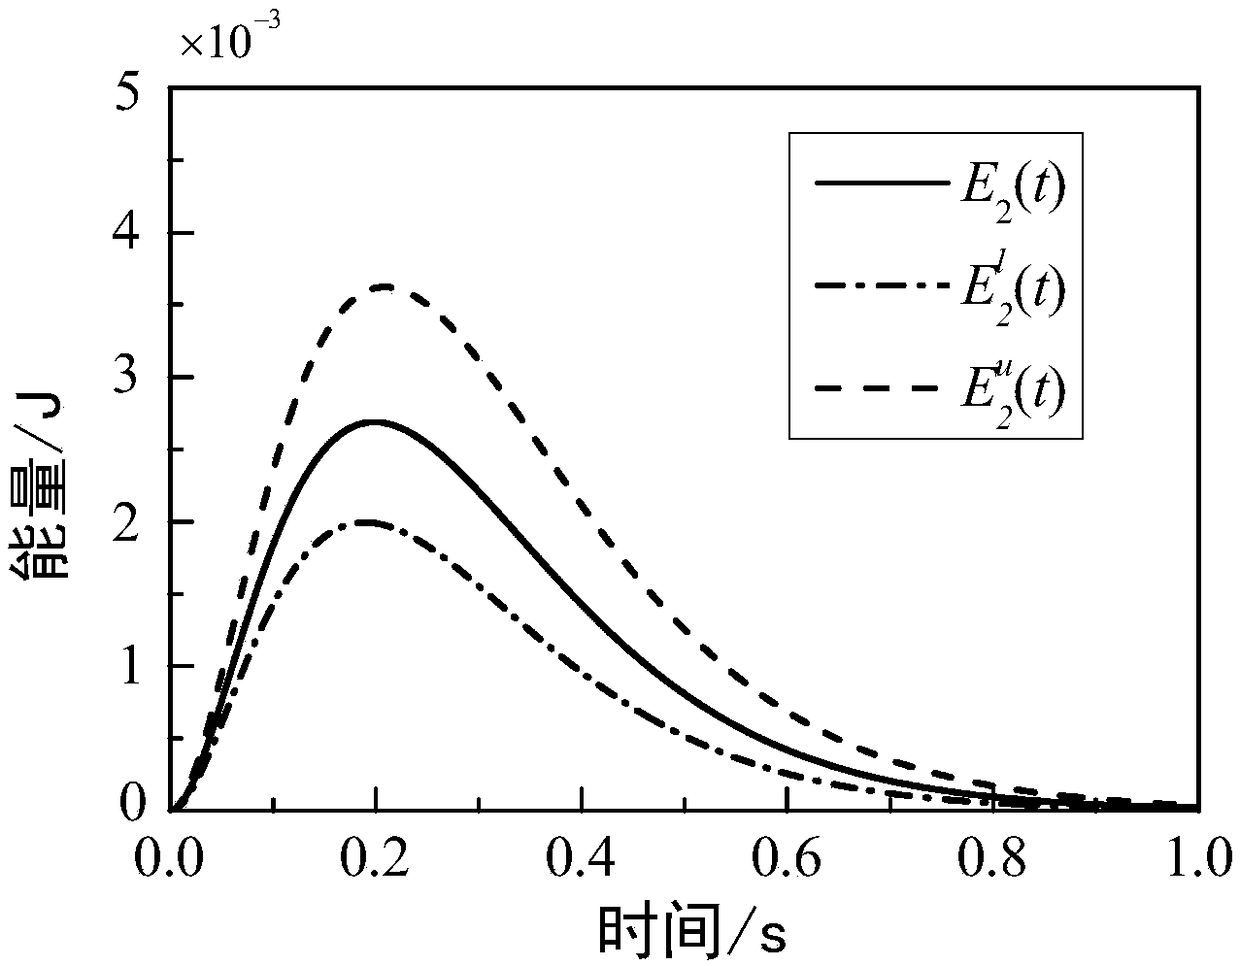 Transient statistical energy response prediction method considering uncertain structure